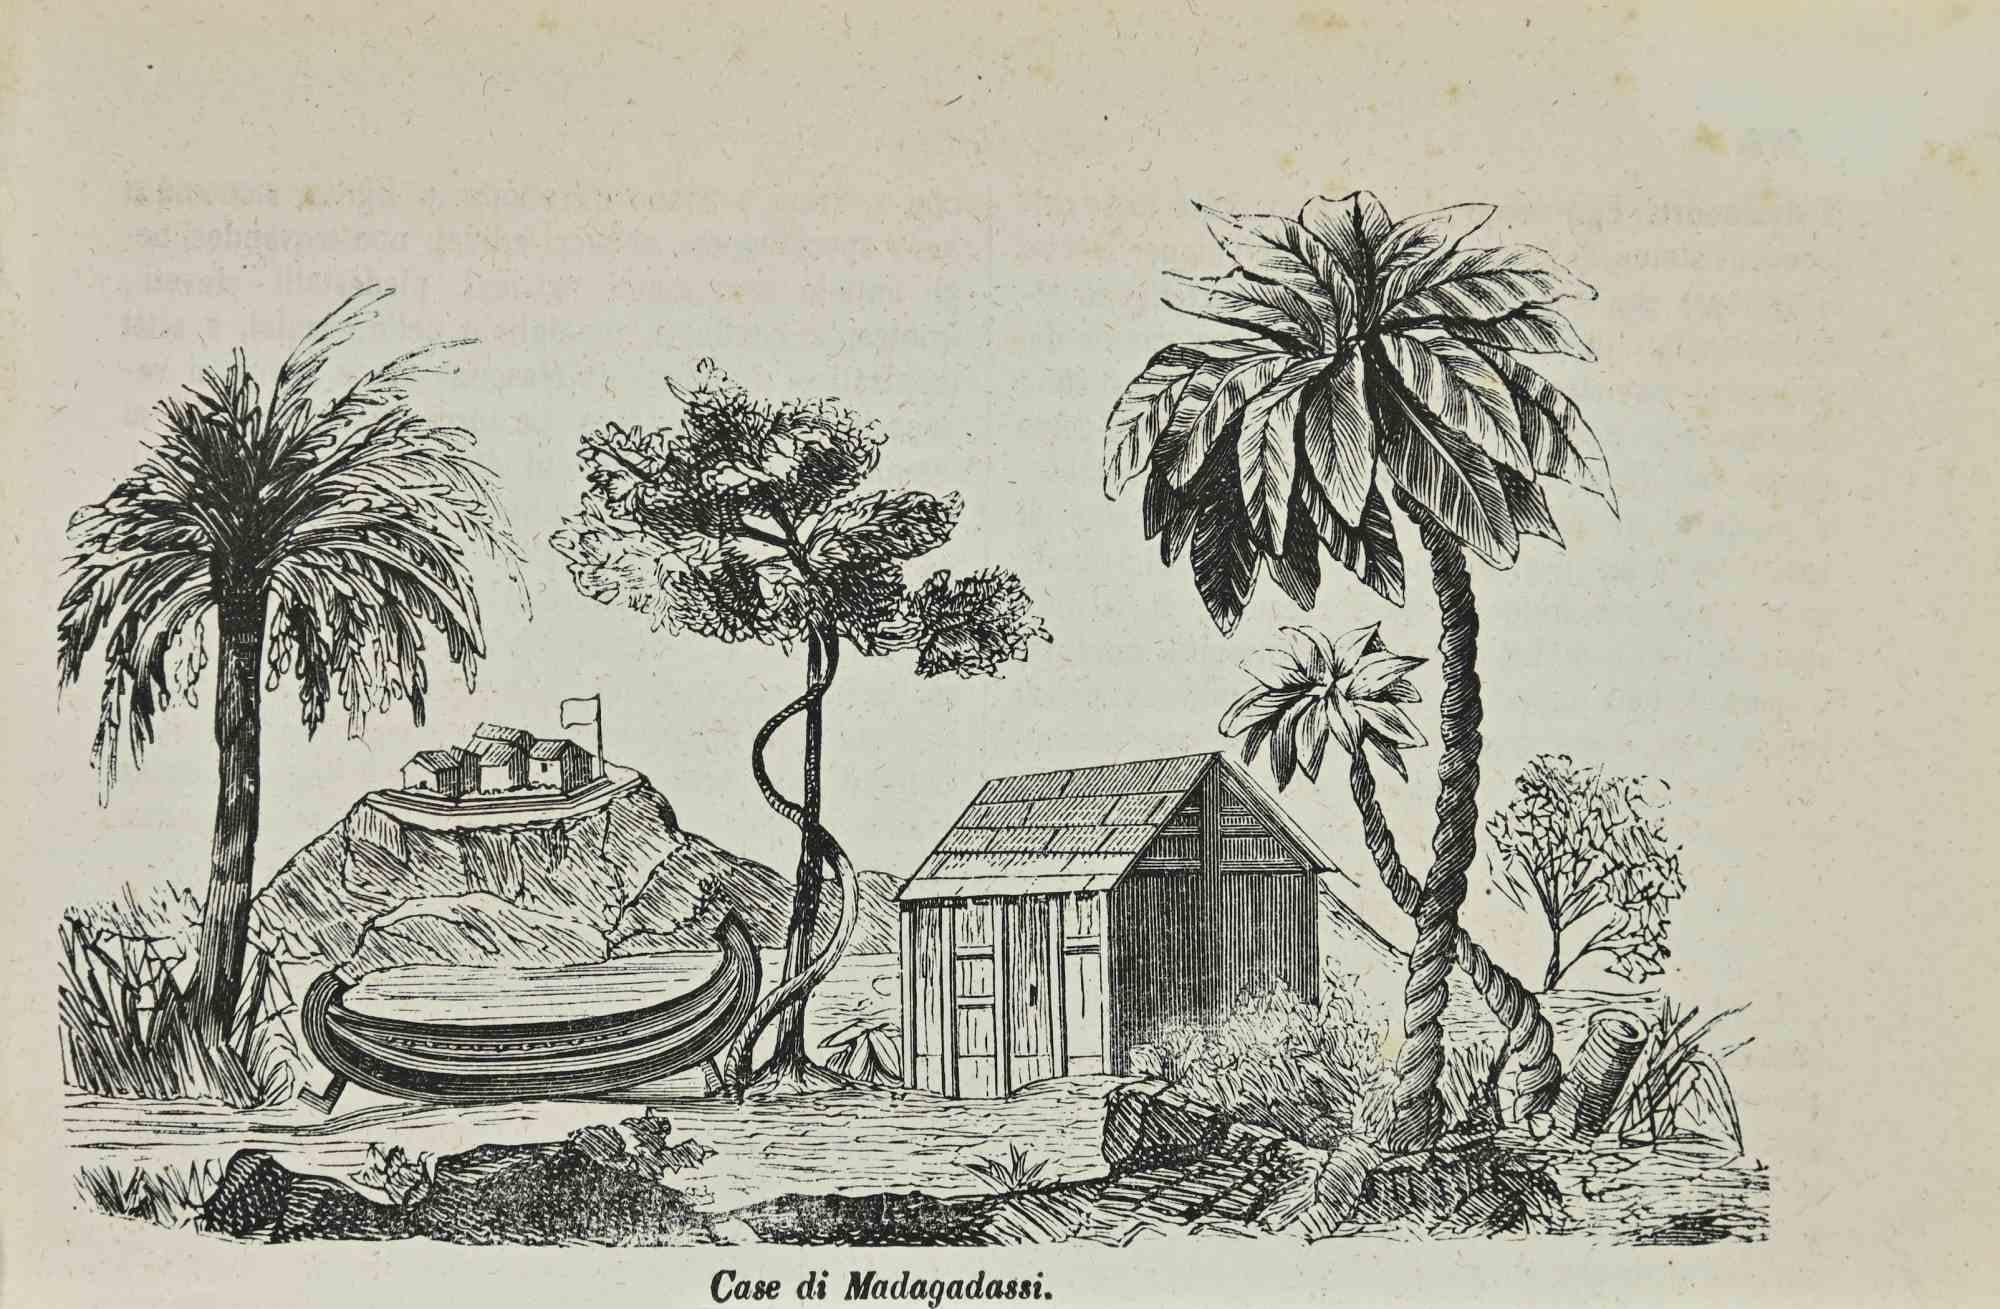 Unknown Figurative Print - Houses of Madagadassi - Lithograph - 1862